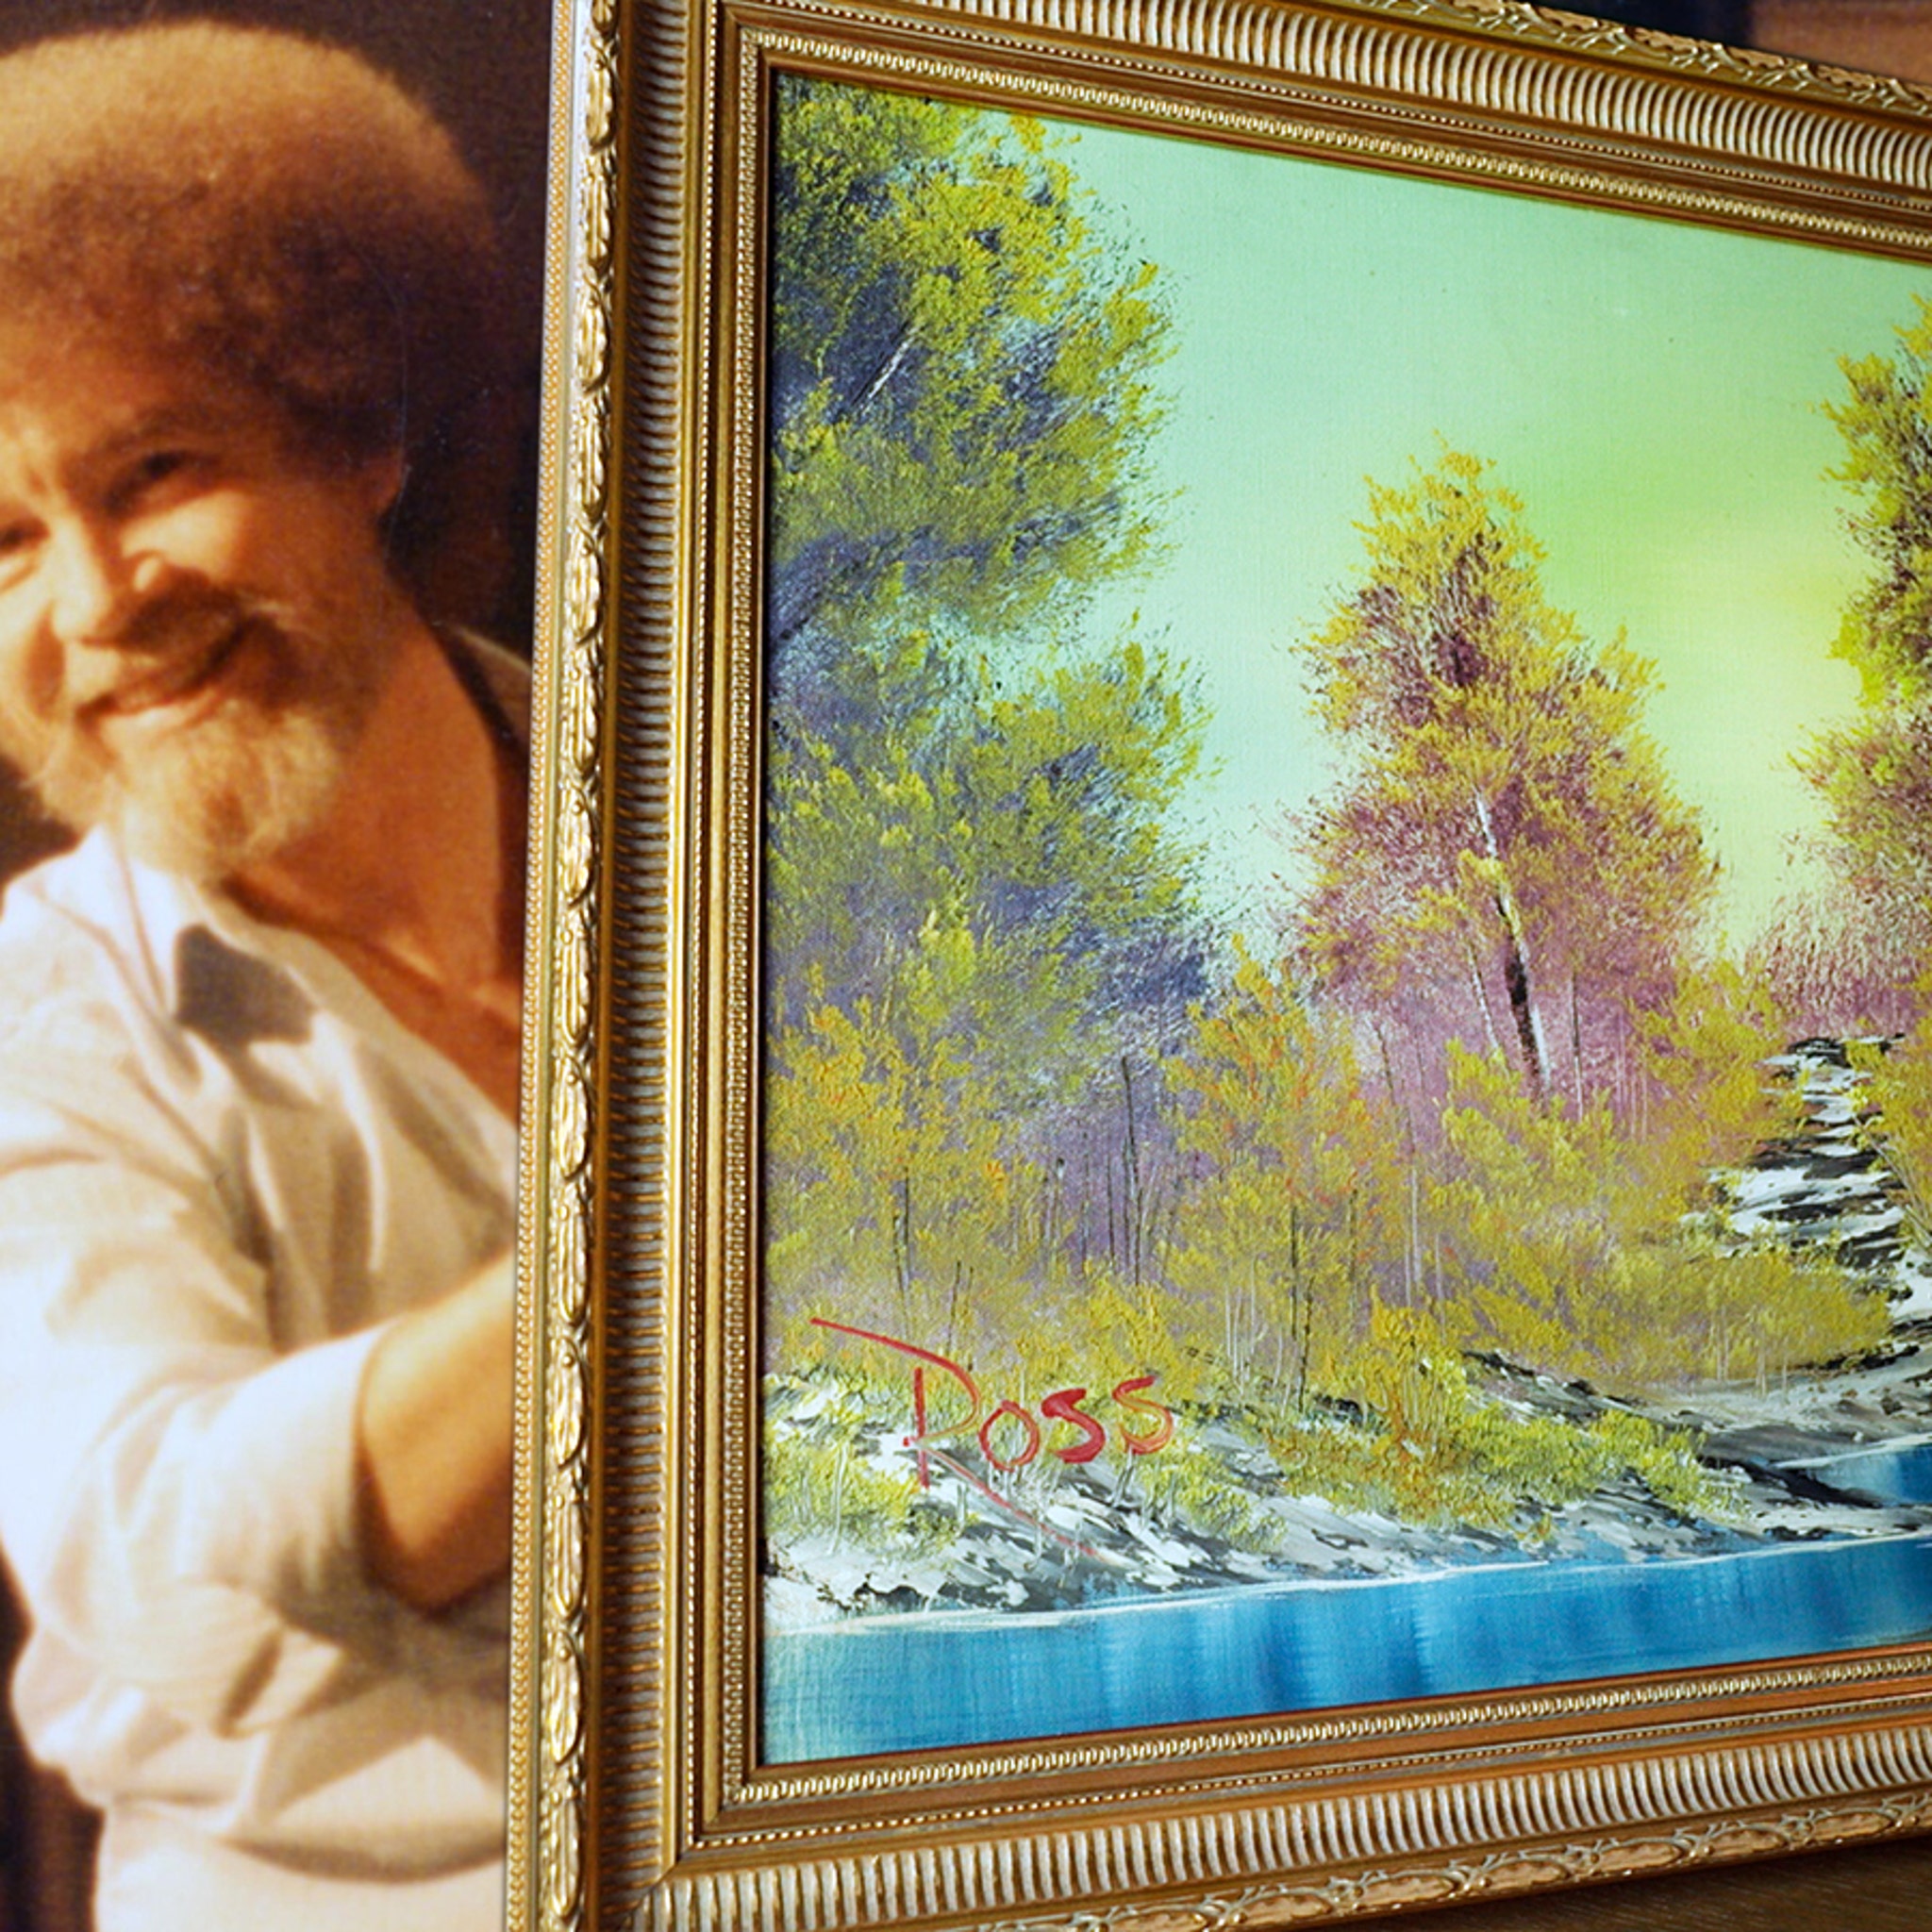 The Joy of Painting - Digital by Bob Ross